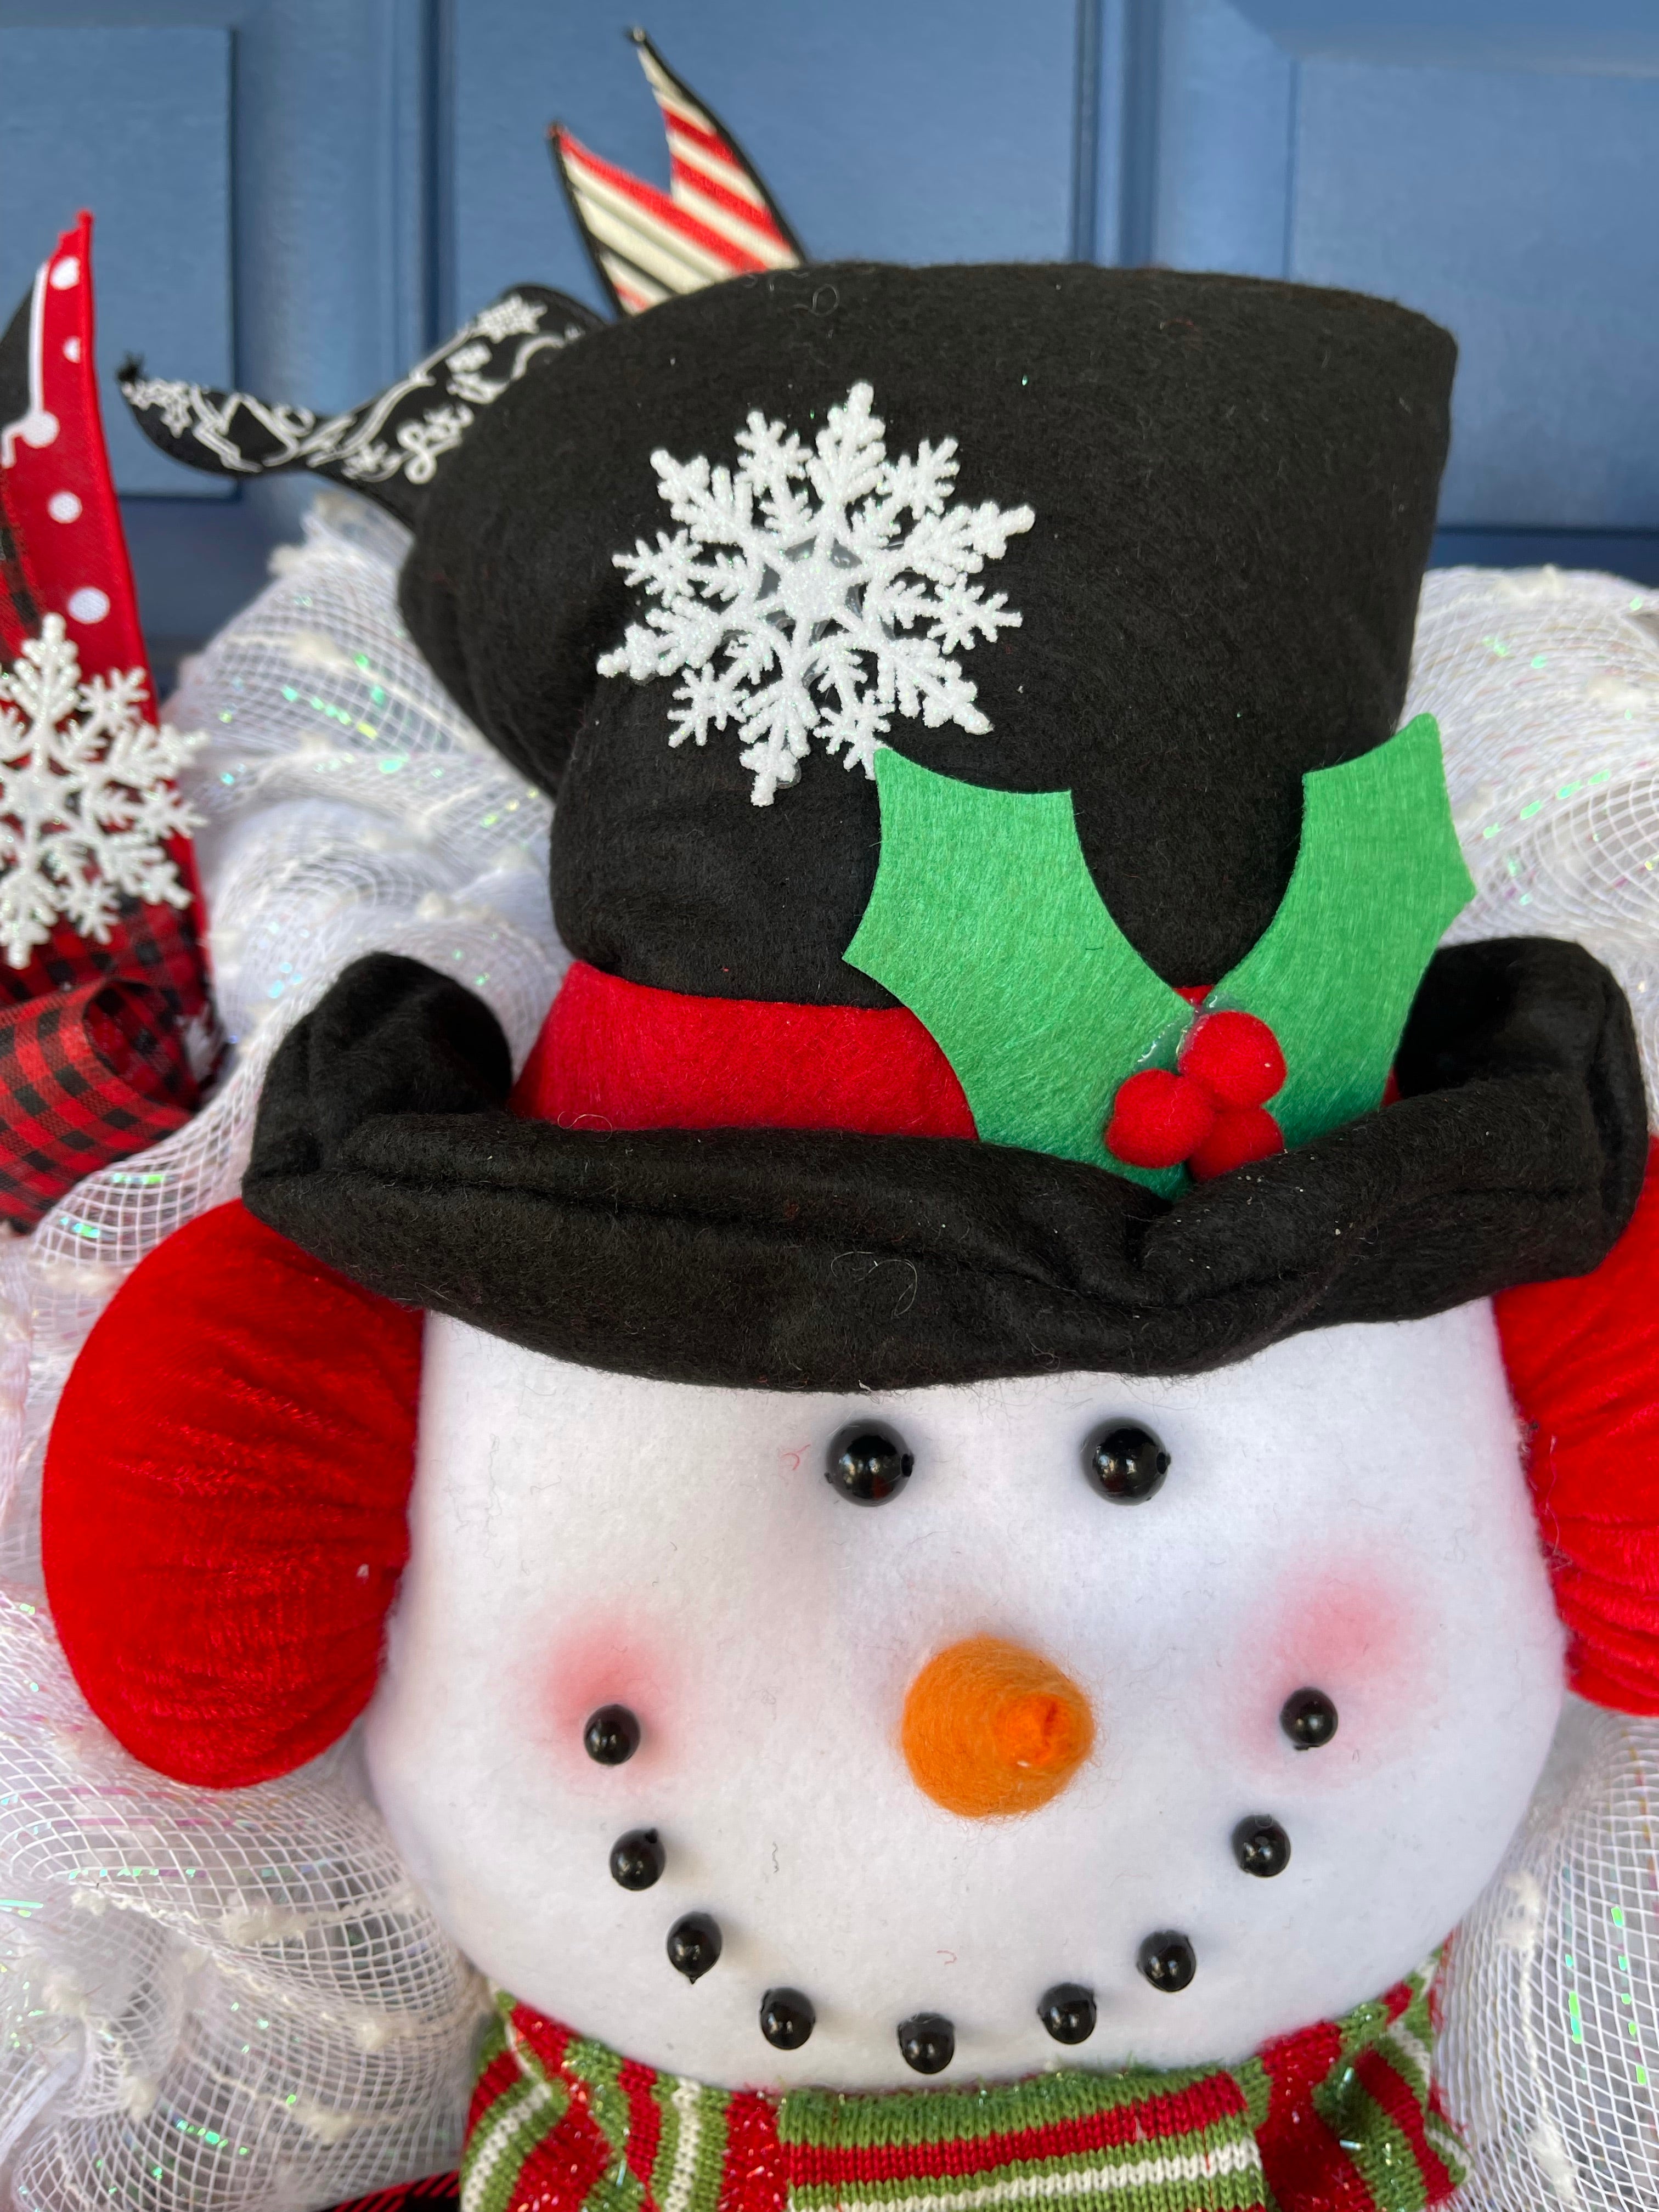 Close Up Detail of Plush Snowman Face with A Carrot Nose, wearing a Black Top Hat with a Snowflake, and Red Brim with Holly Berries, wearing Red Ear Muffs and a Green, White and Red Scarf